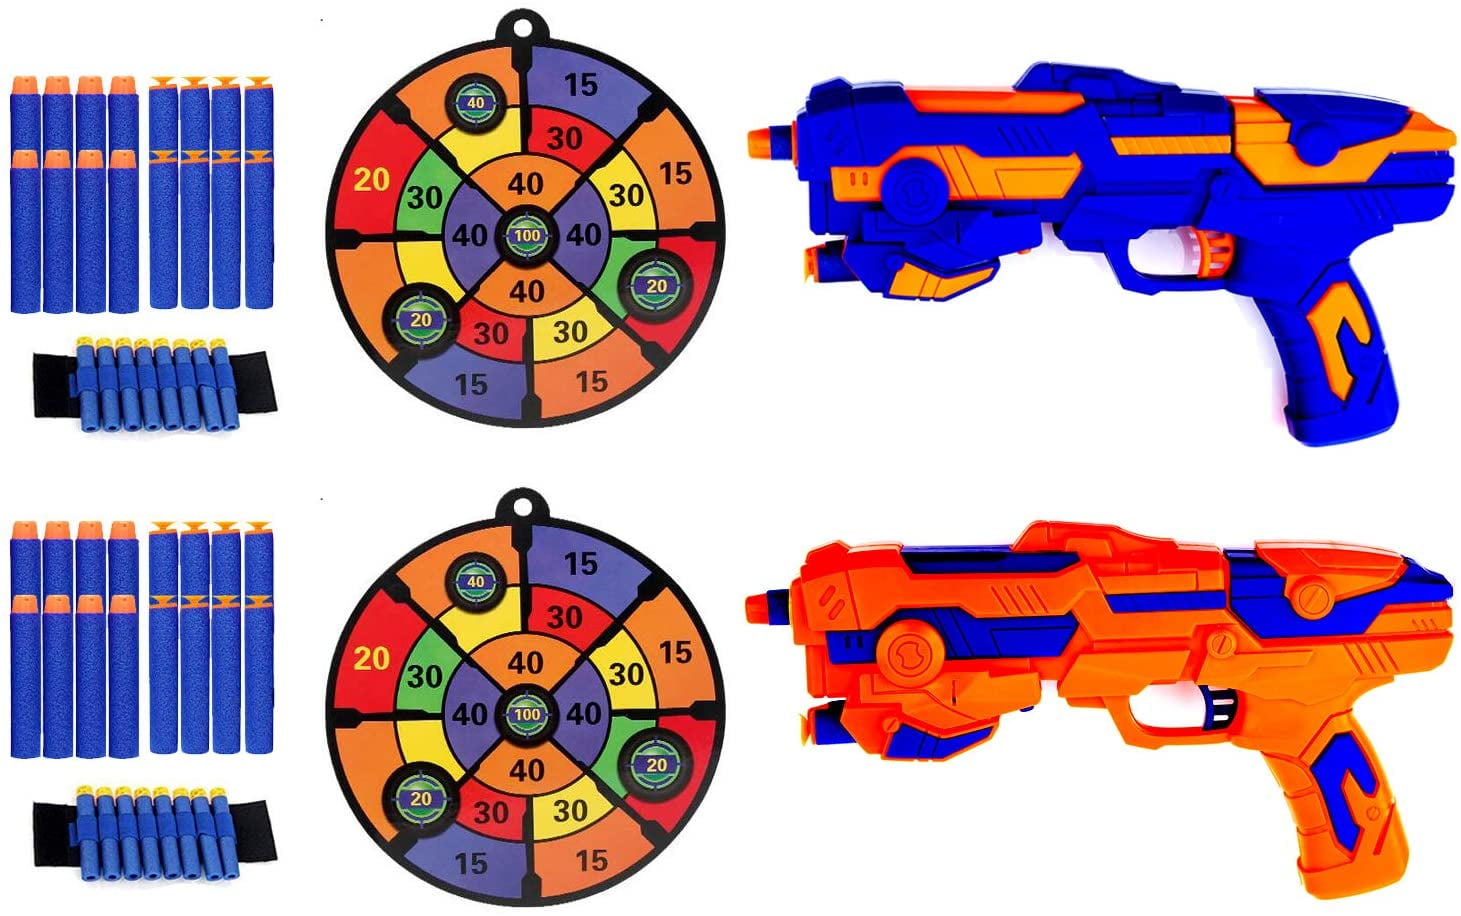 2 Target for Kids Birthday Gifts Party Supplies RAYNEL 2 Pack Blaster Guns Toy Guns for Boys with 8 Soft Foam Darts 